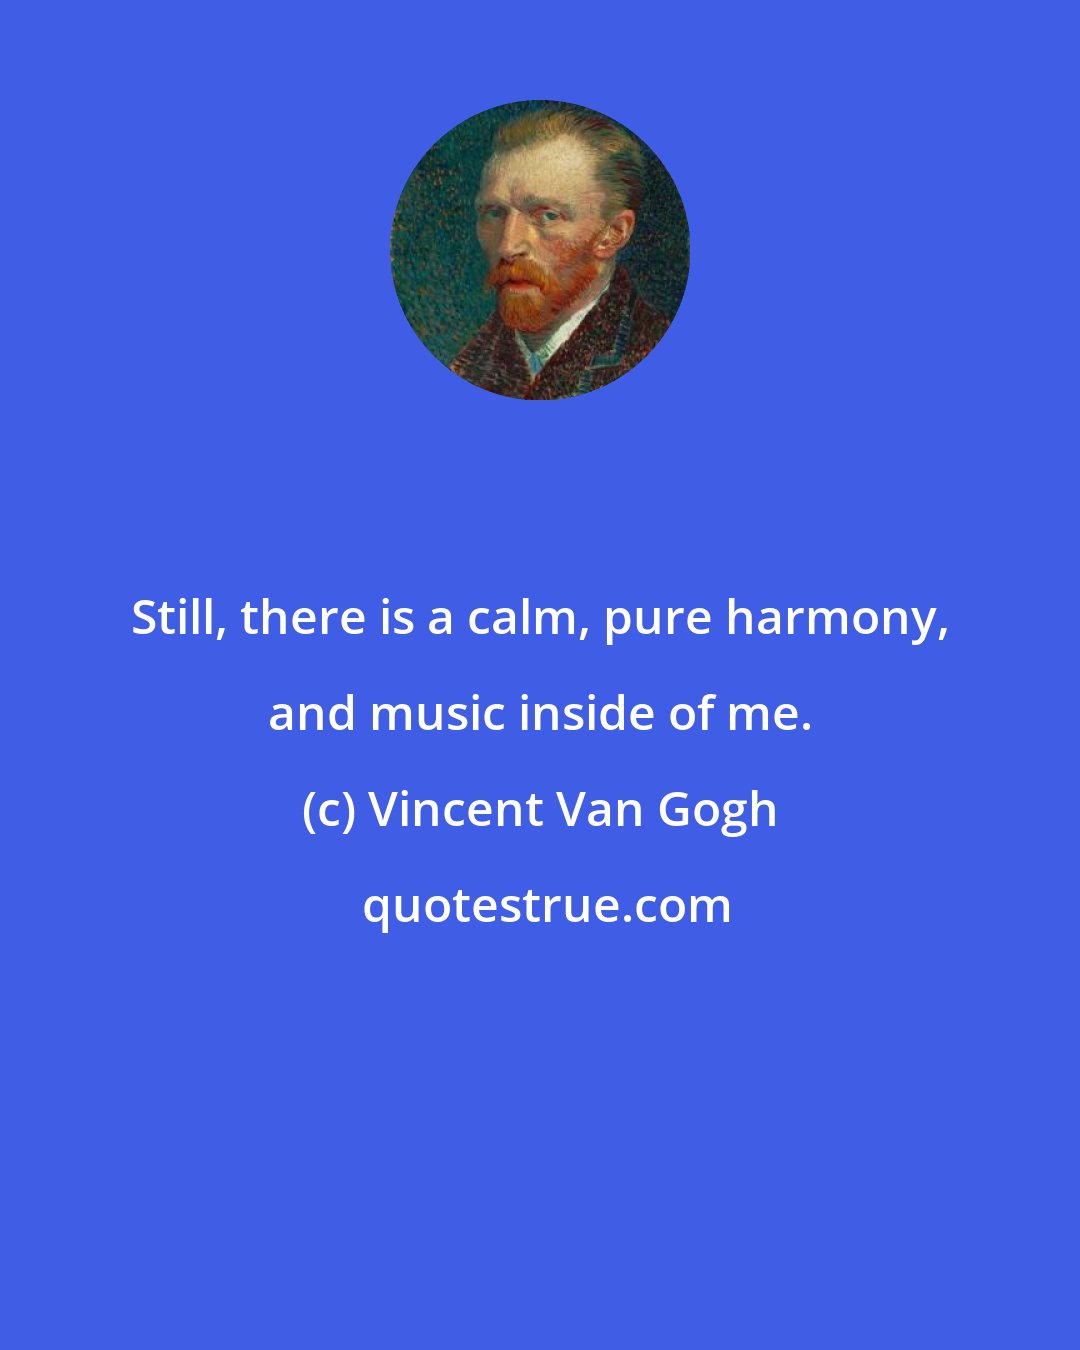 Vincent Van Gogh: Still, there is a calm, pure harmony, and music inside of me.